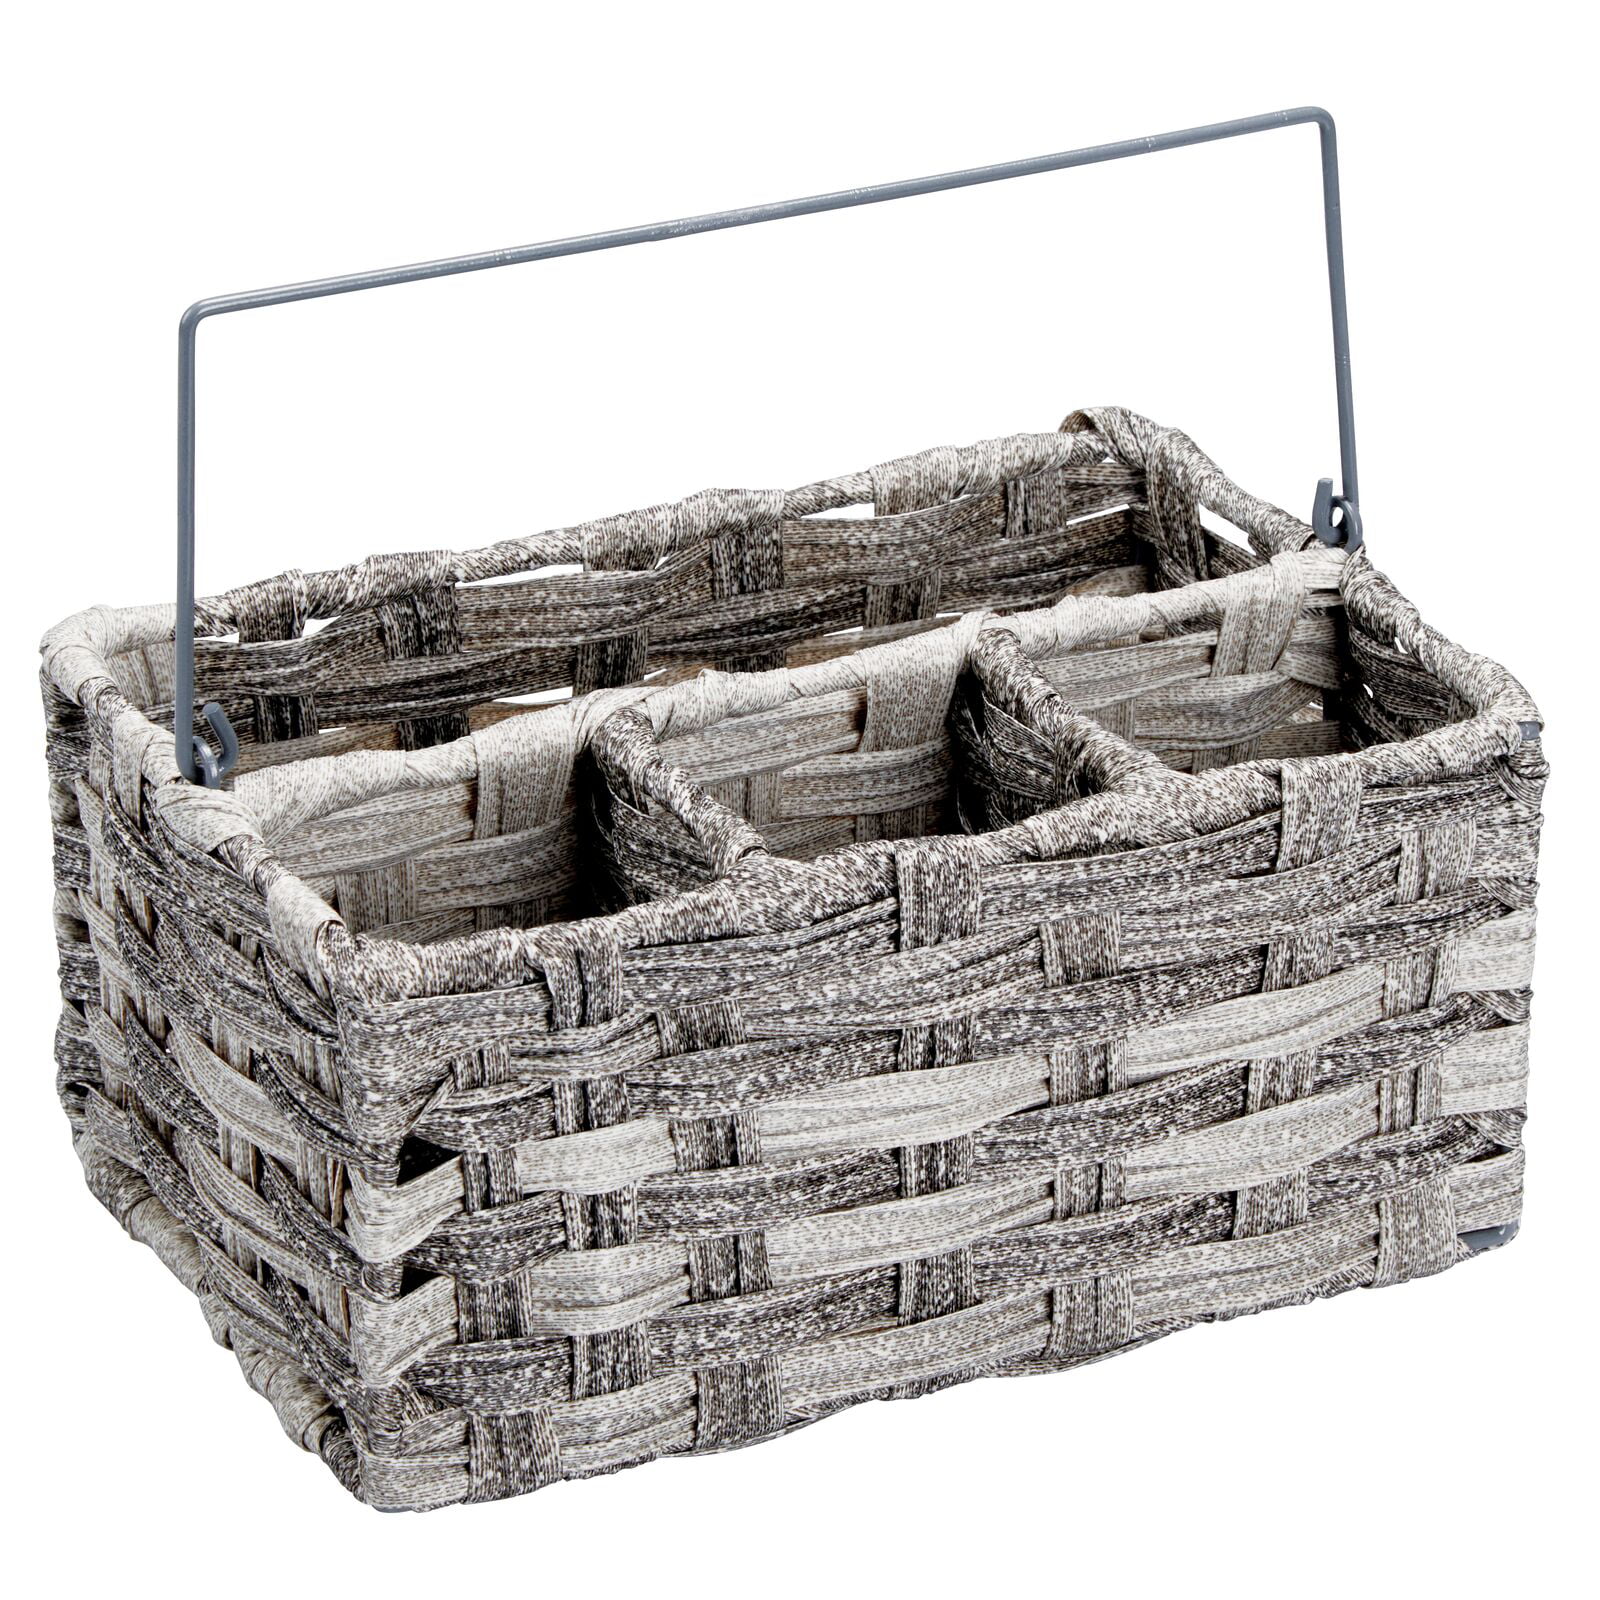 Better Homes & Garden Galvanized & Washed Gray Resin Rattan Serve Caddy 